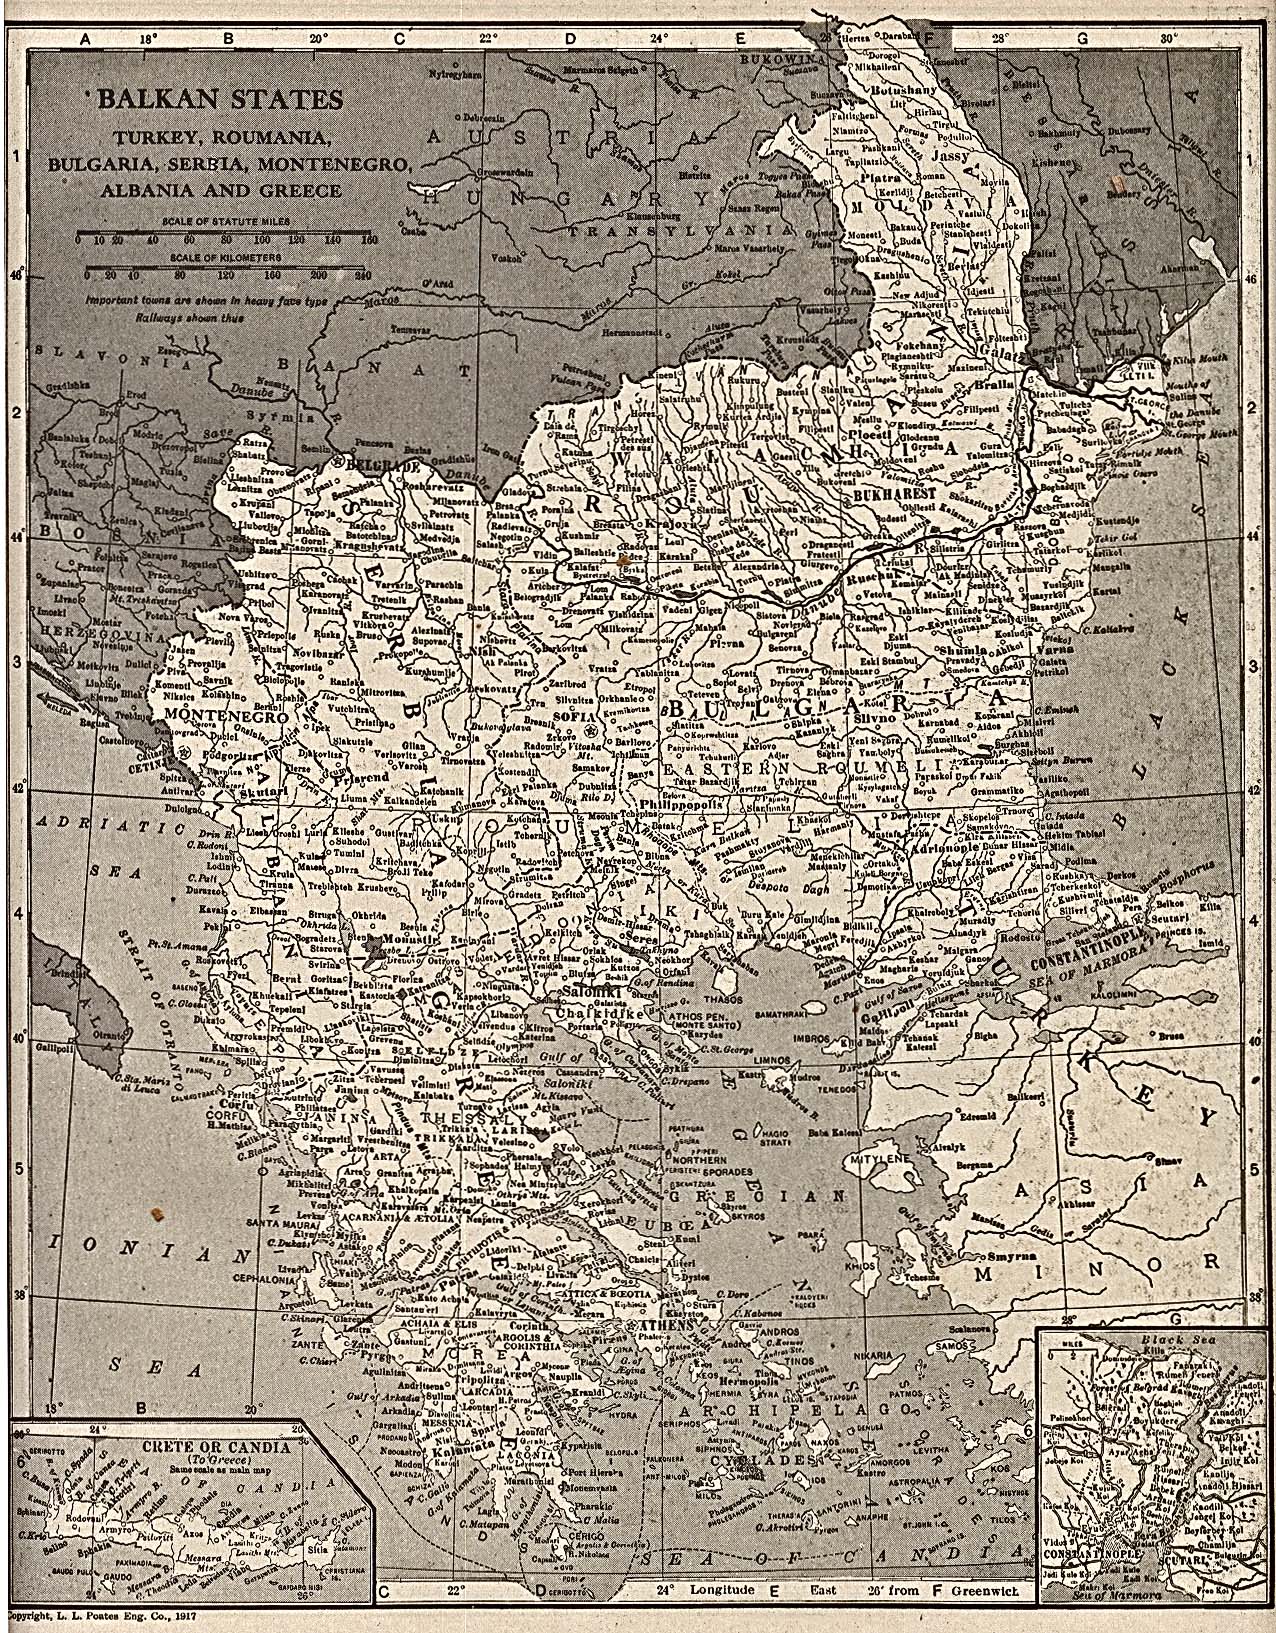 Historical Map of Balkan, Balkan States: Turkey, Roumania, Bulgaria, Serbia, Montenegro, Albania and Greece 1917 (860K)
From The New Encyclopedic Atlas And Gazetteer Of The World, edited and revised by Francis J. Reynolds, P.F. Collier and Son Publishers, New York, 1917.
